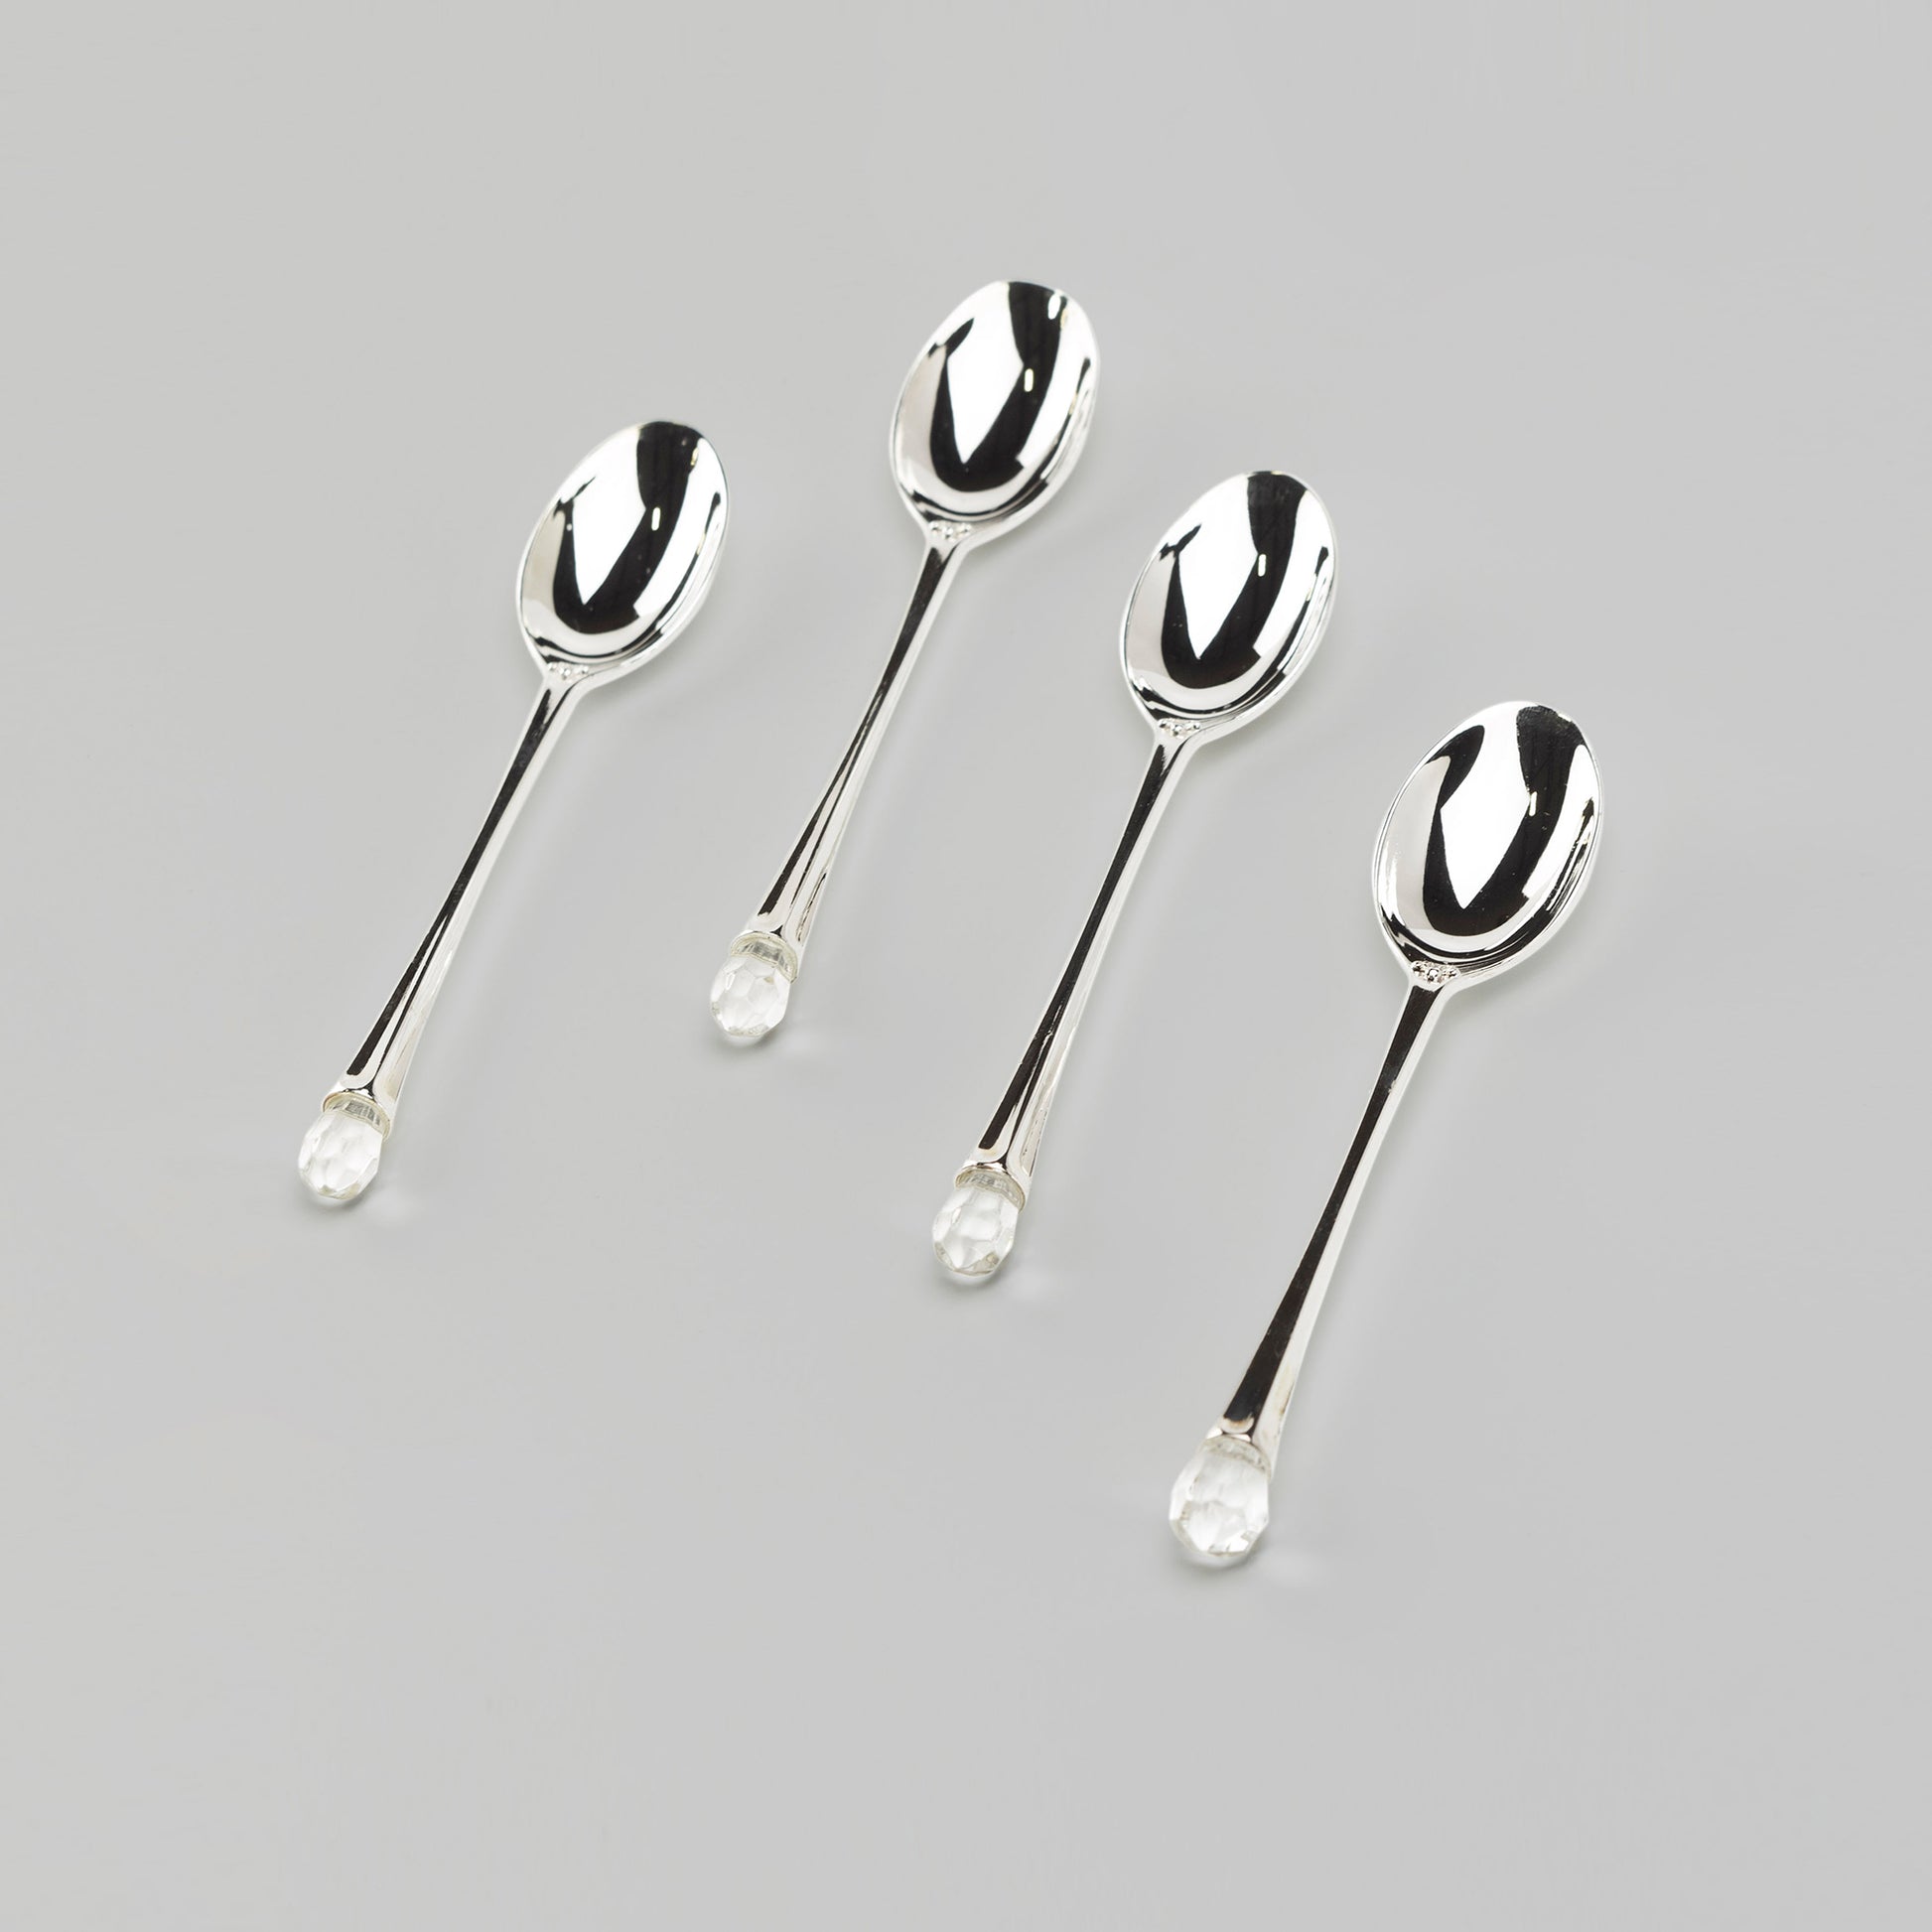 Silver Plated Demi Spoon Set of 4 with Crystal Handle Design –  GracieChinaShop